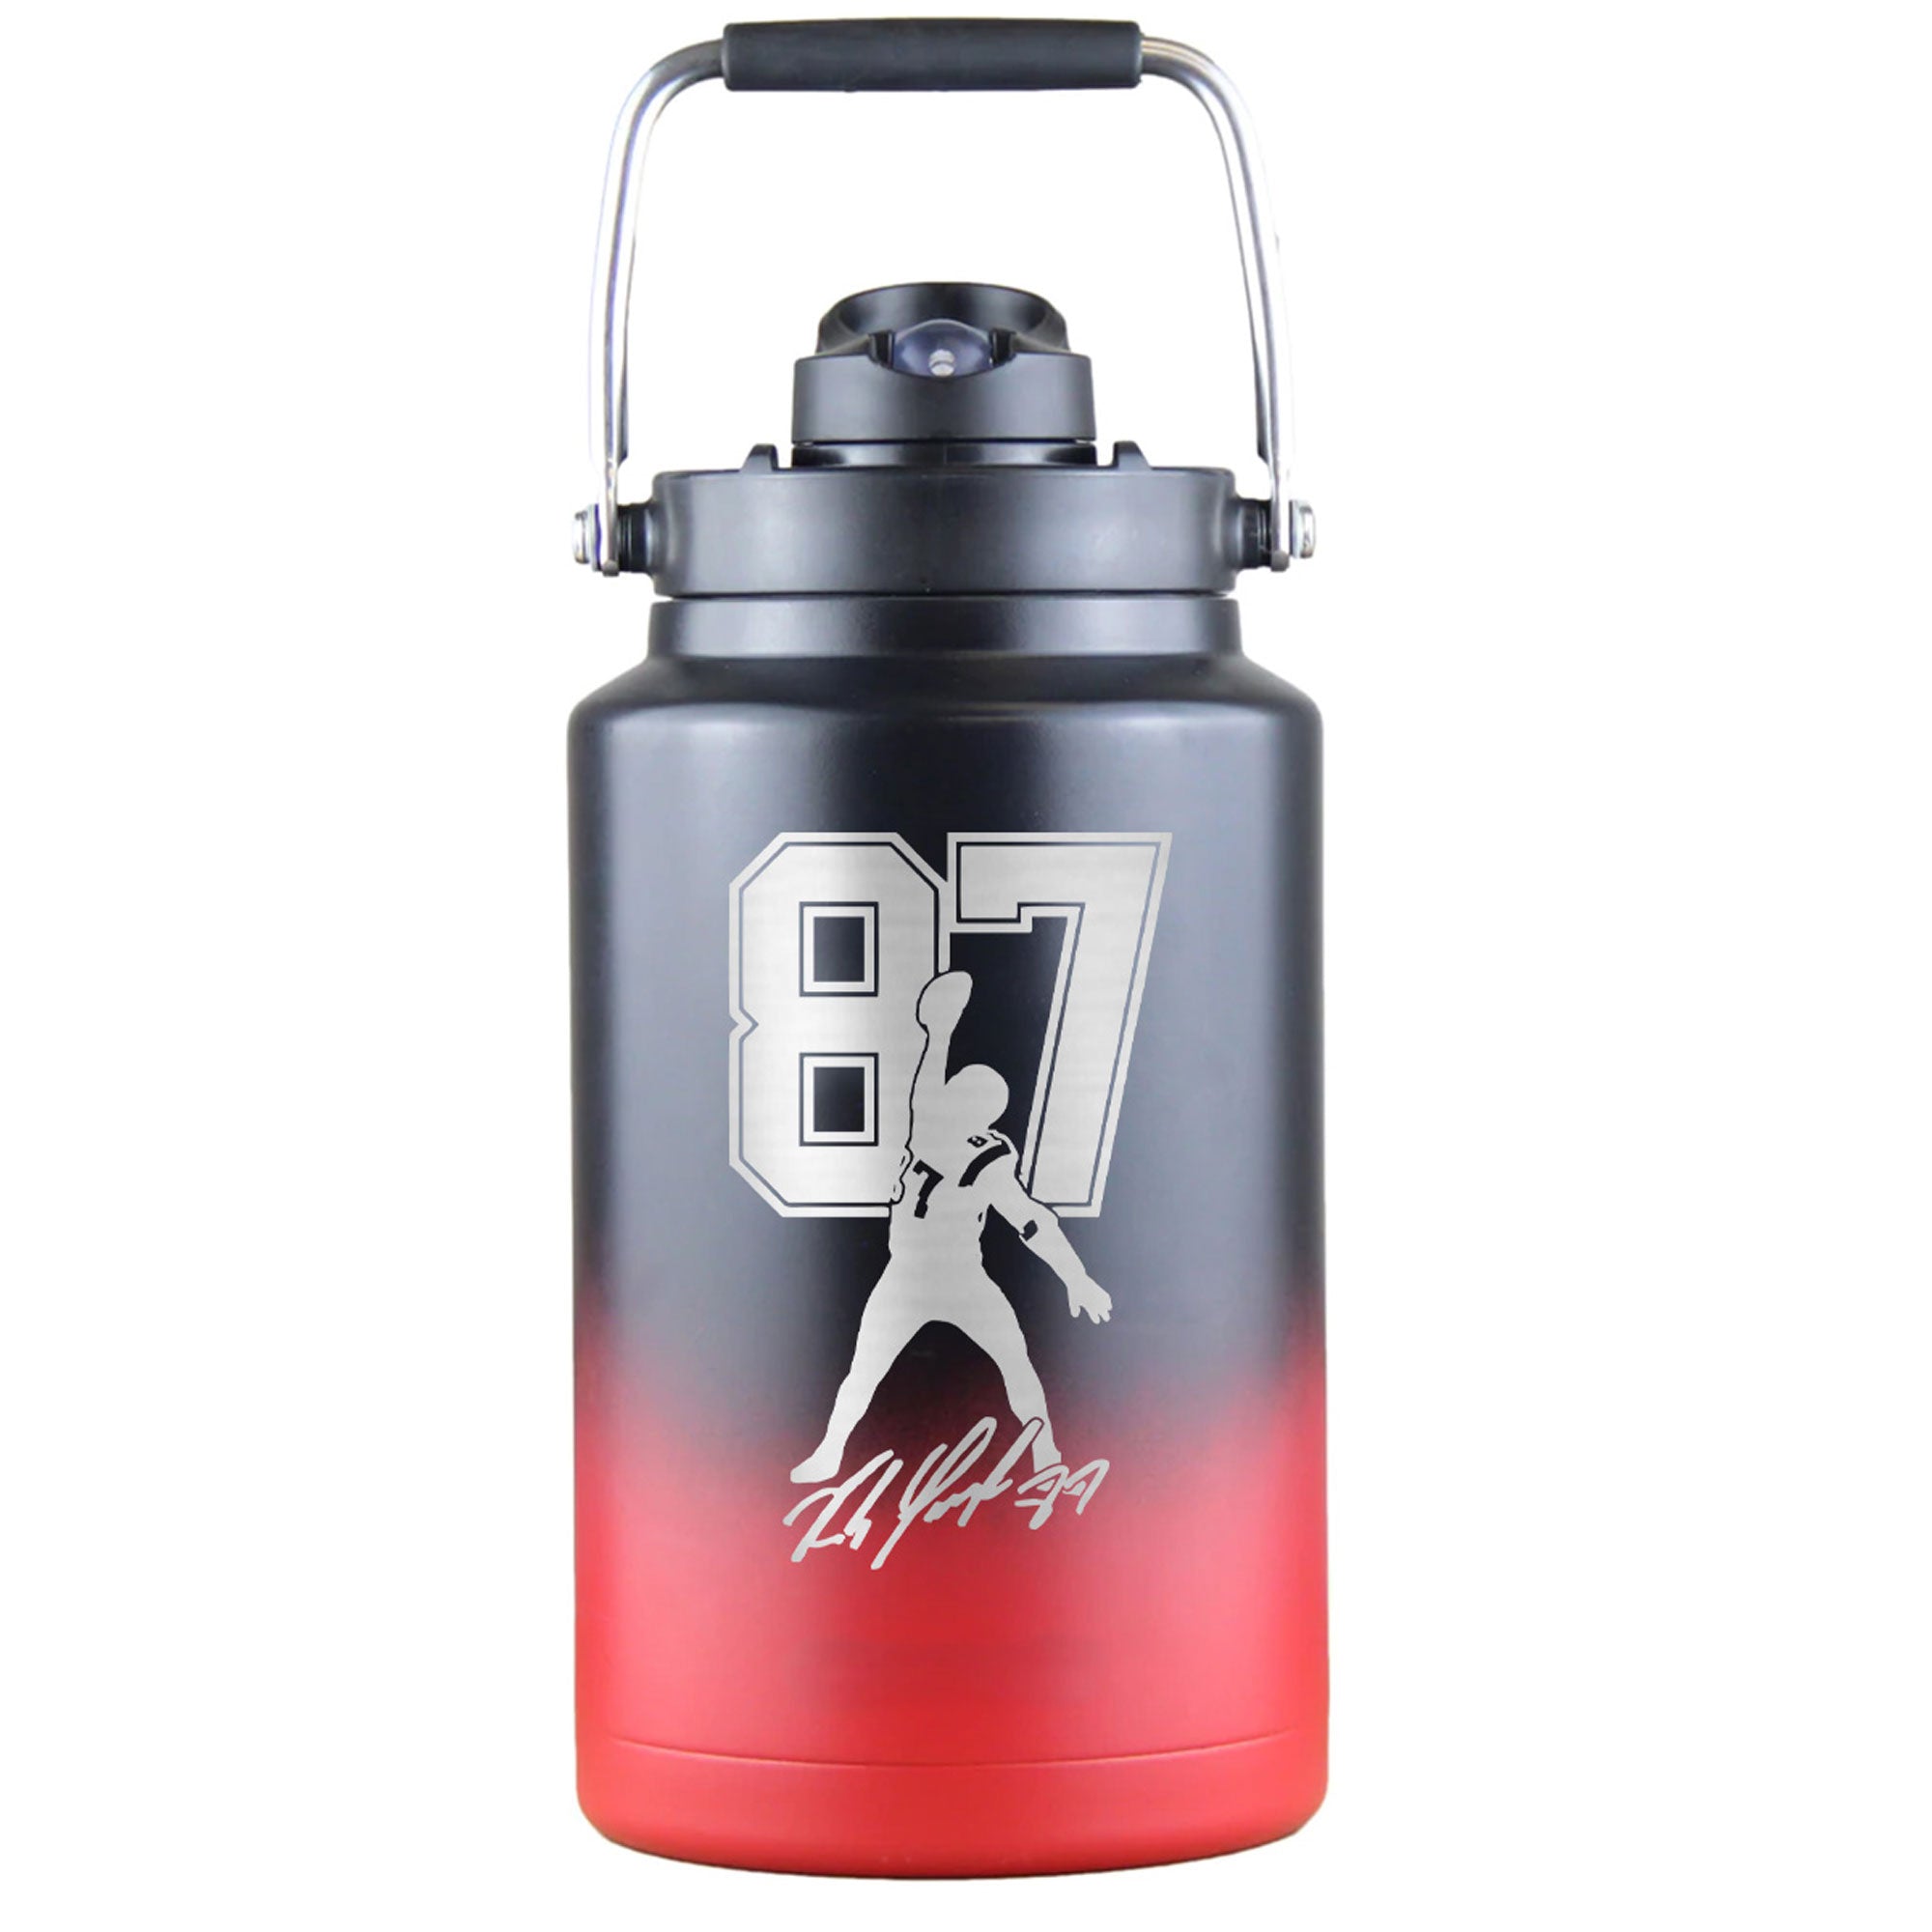 Gronk Signature Edition One Gallon Jug - Red Black Ombre